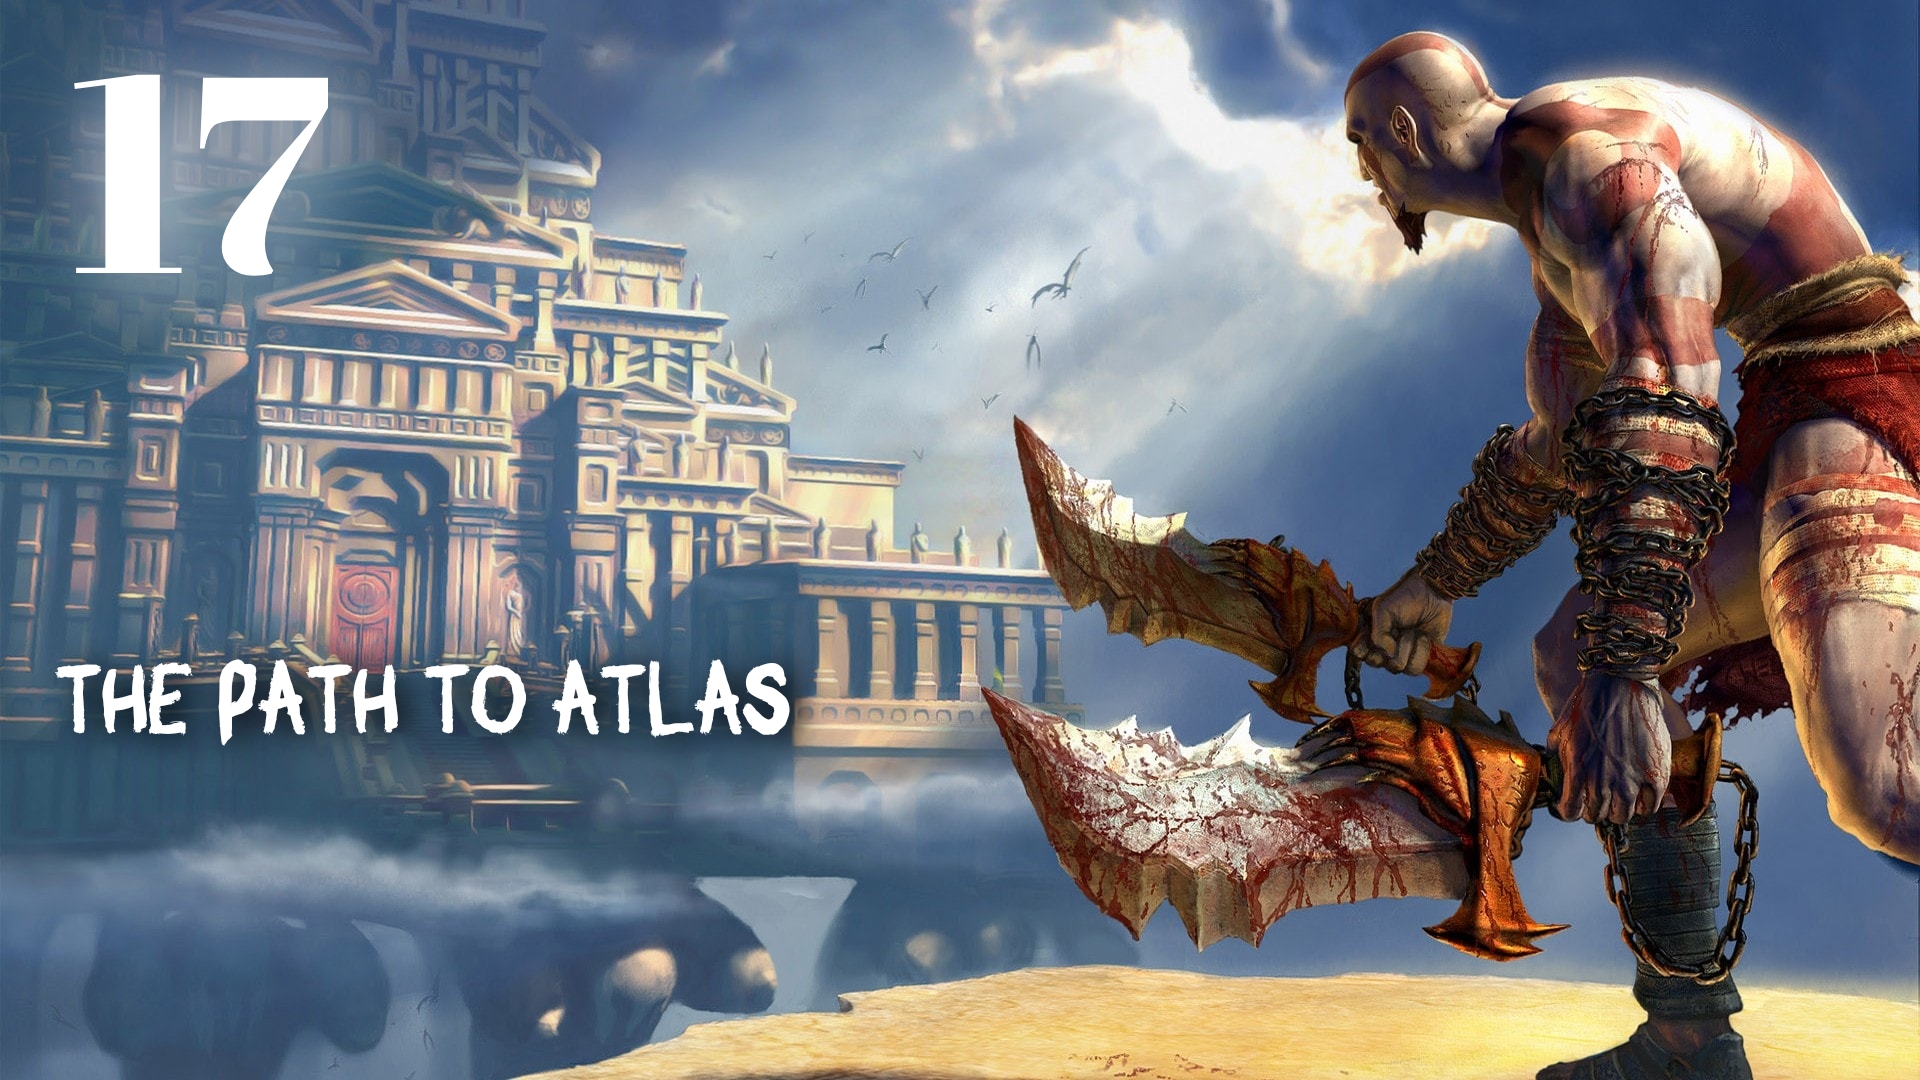 God of War HD The Challenge of Atlas: The Path to Atlas